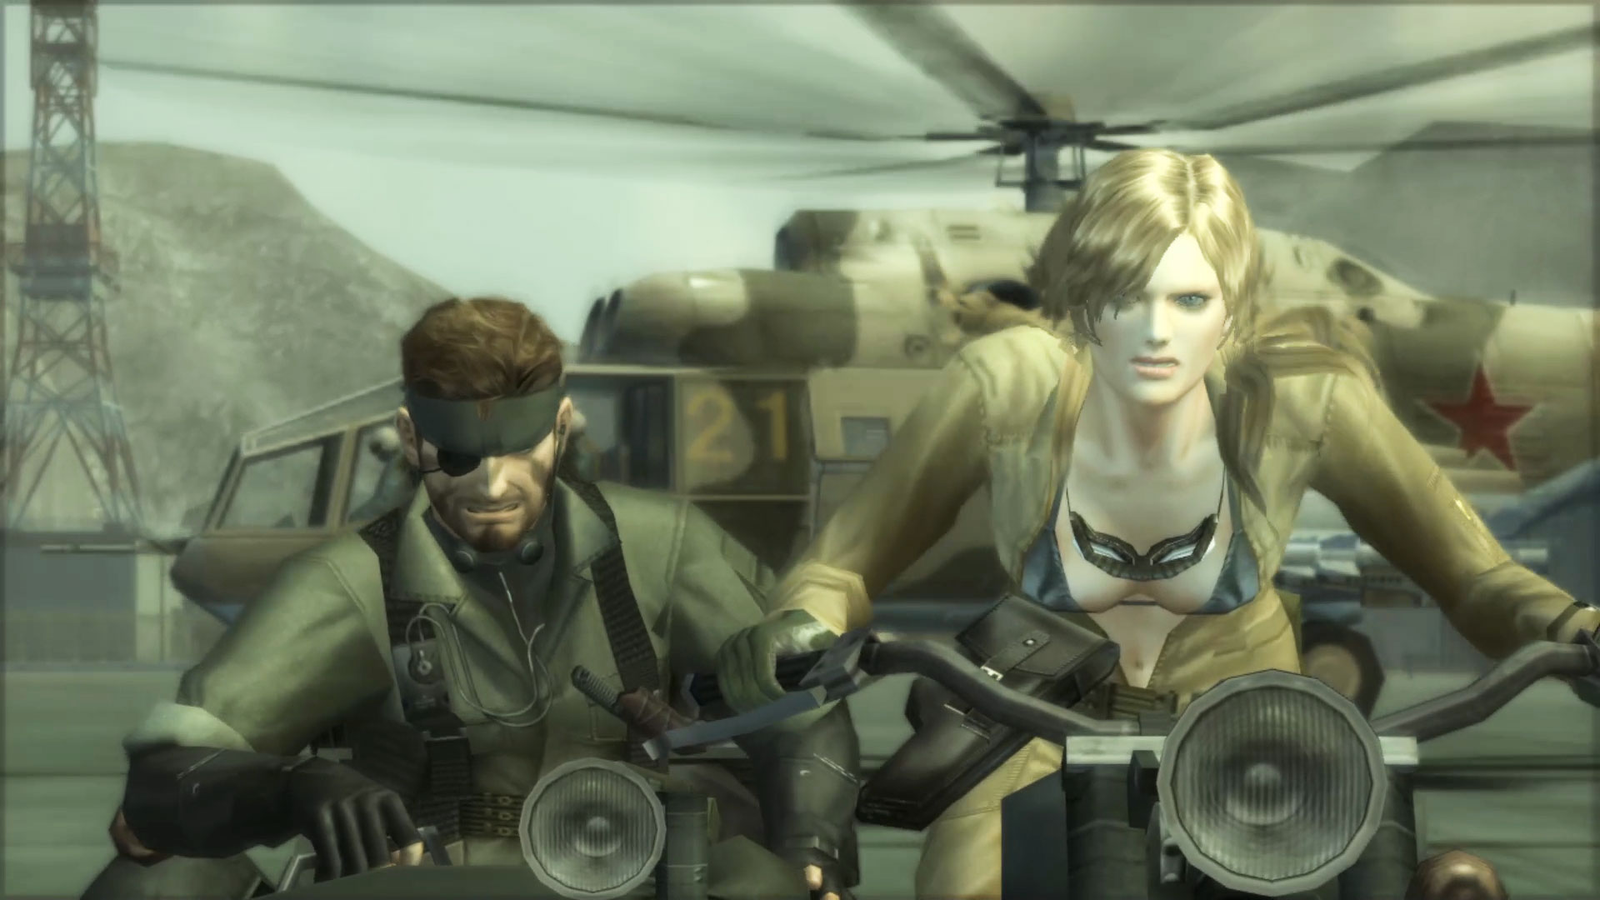 Metal Gear Solid 2 And Snake Eater Have Been Pulled From Sale